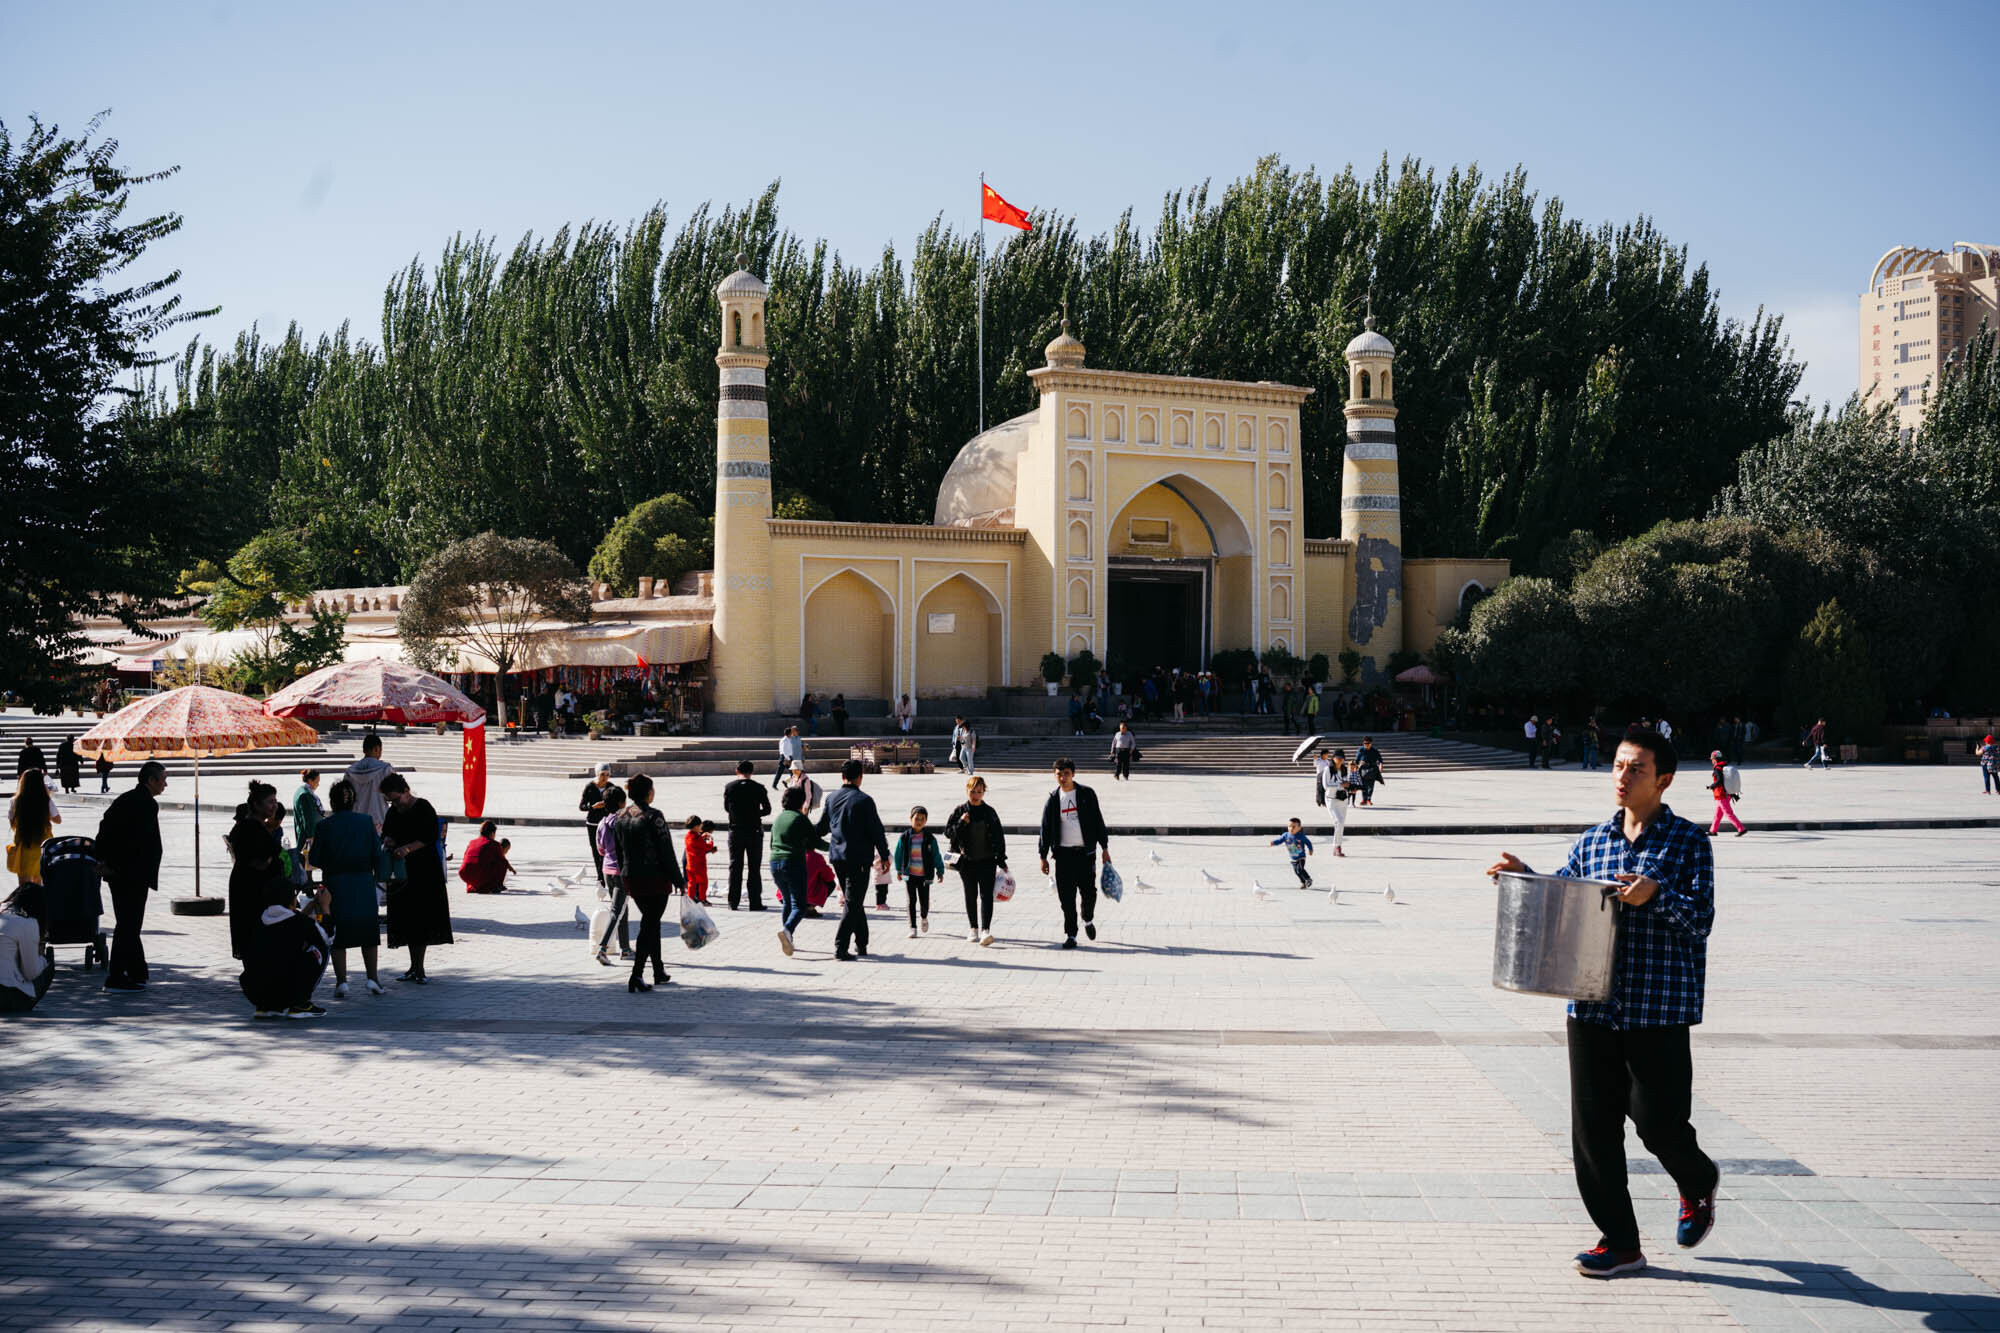  The Id Kah Mosque in central Kashgar 